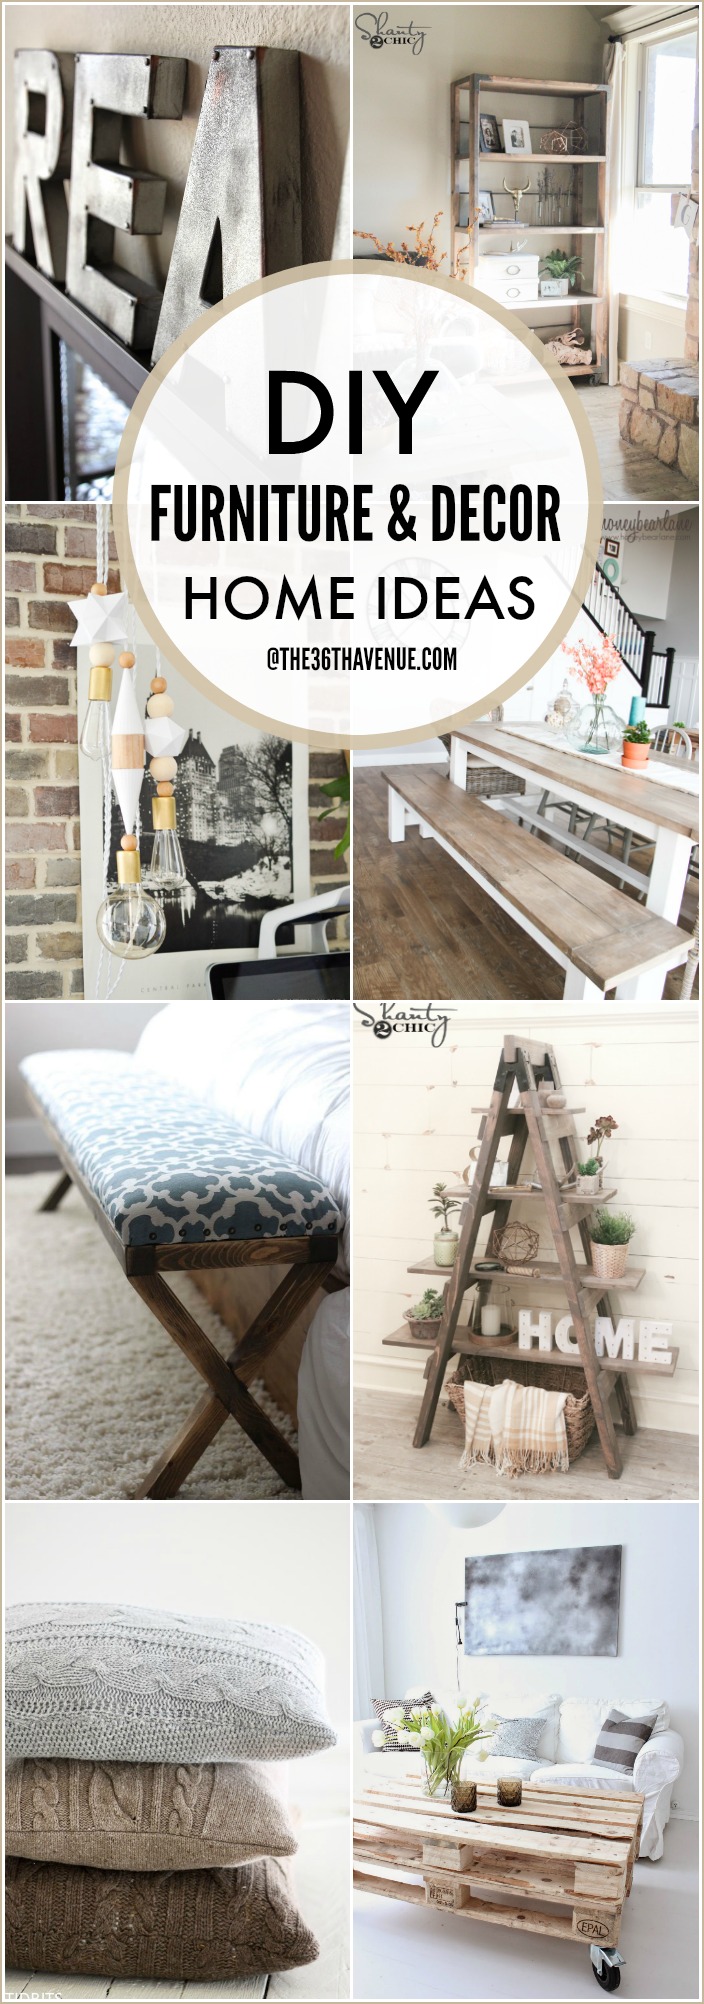 DIY Furniture Tutorials and Home Decor Ideas. Beautiful ways to make any house a home.